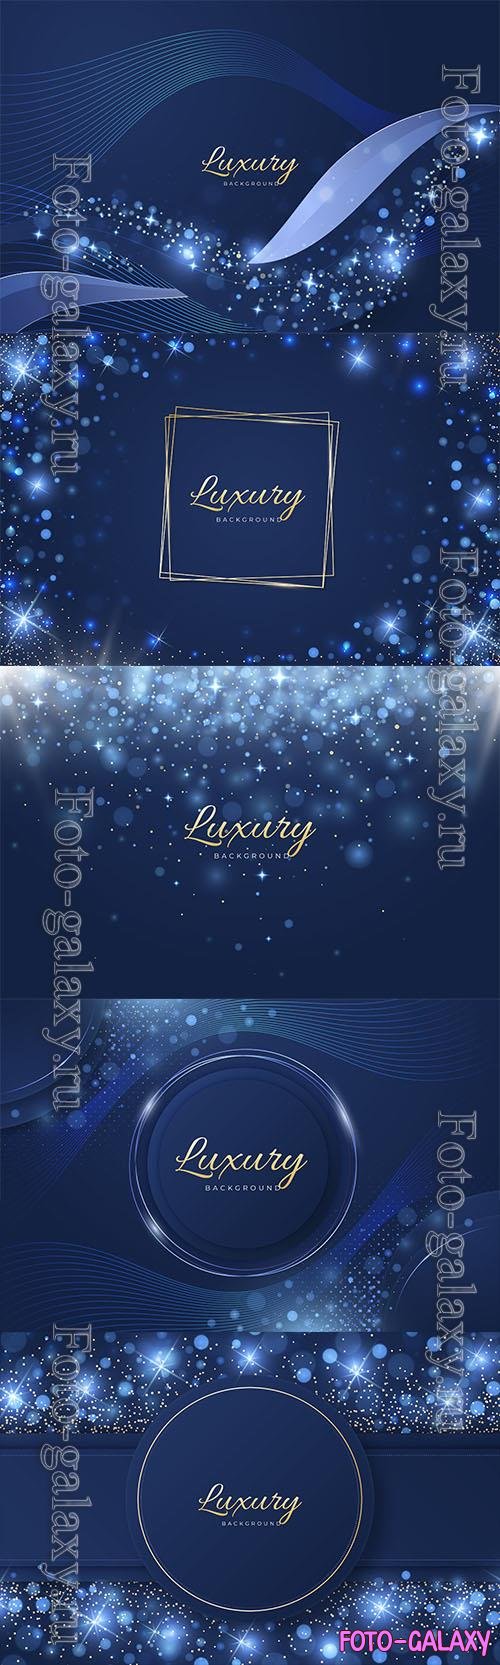 Vector realistic navy blue glitter background